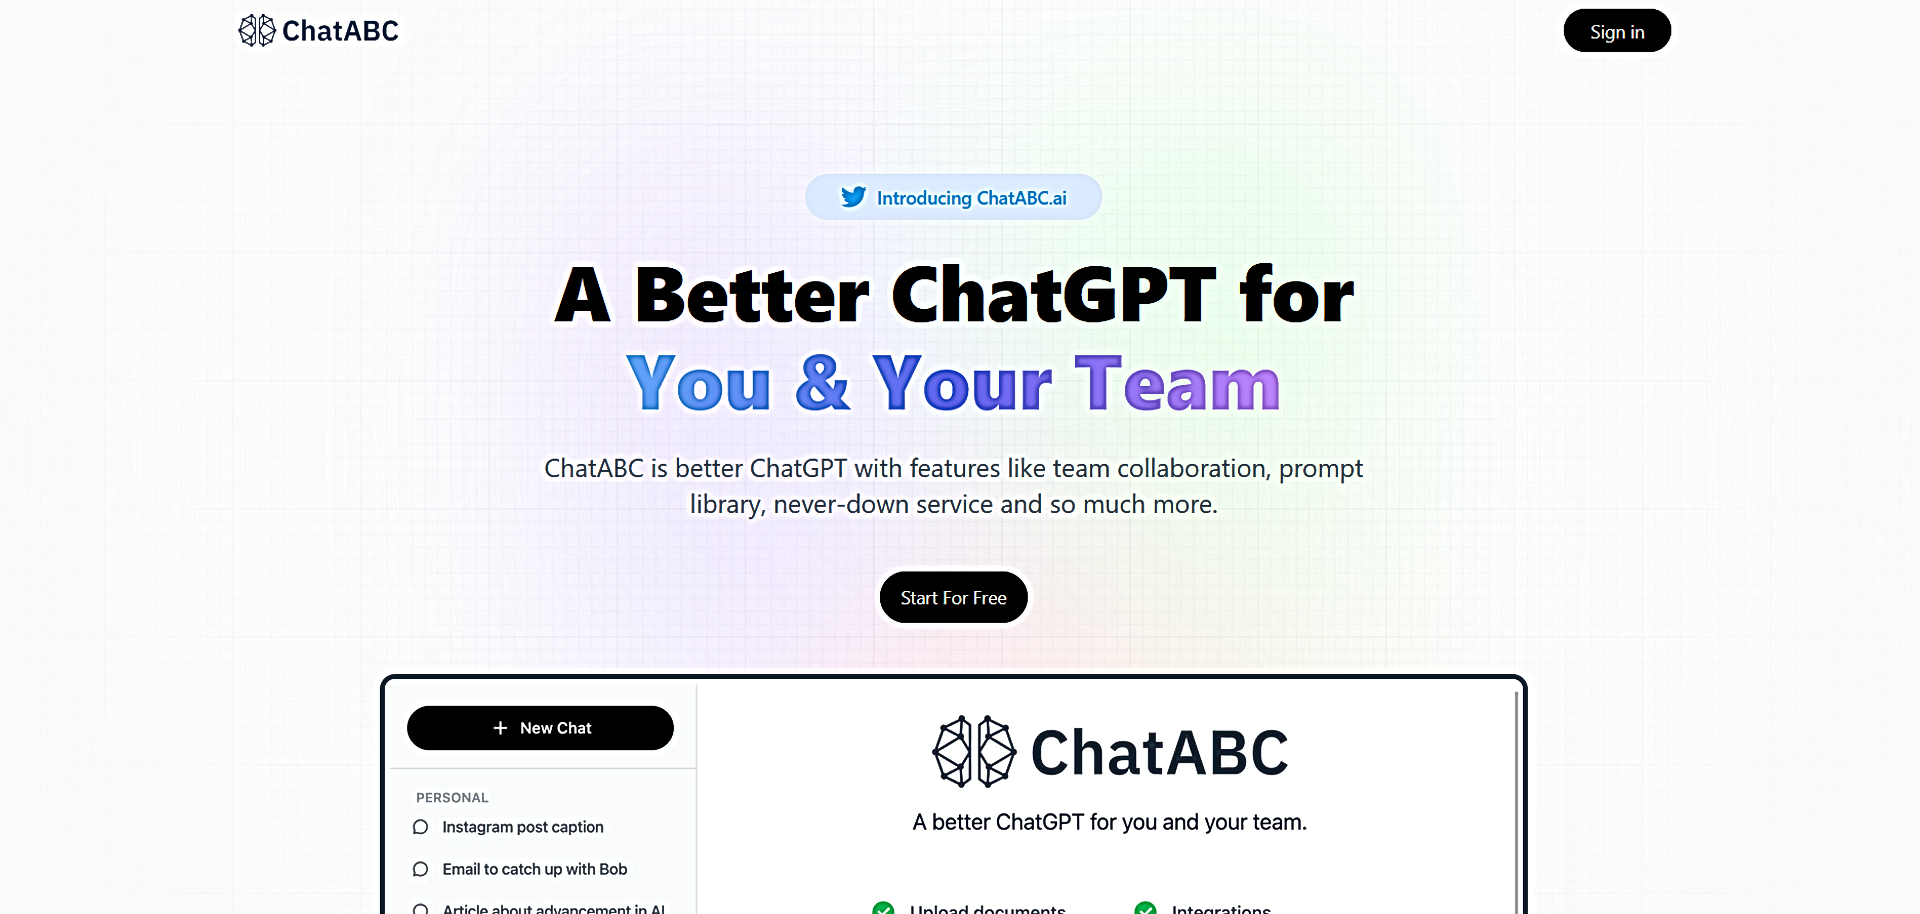 ChatABC featured